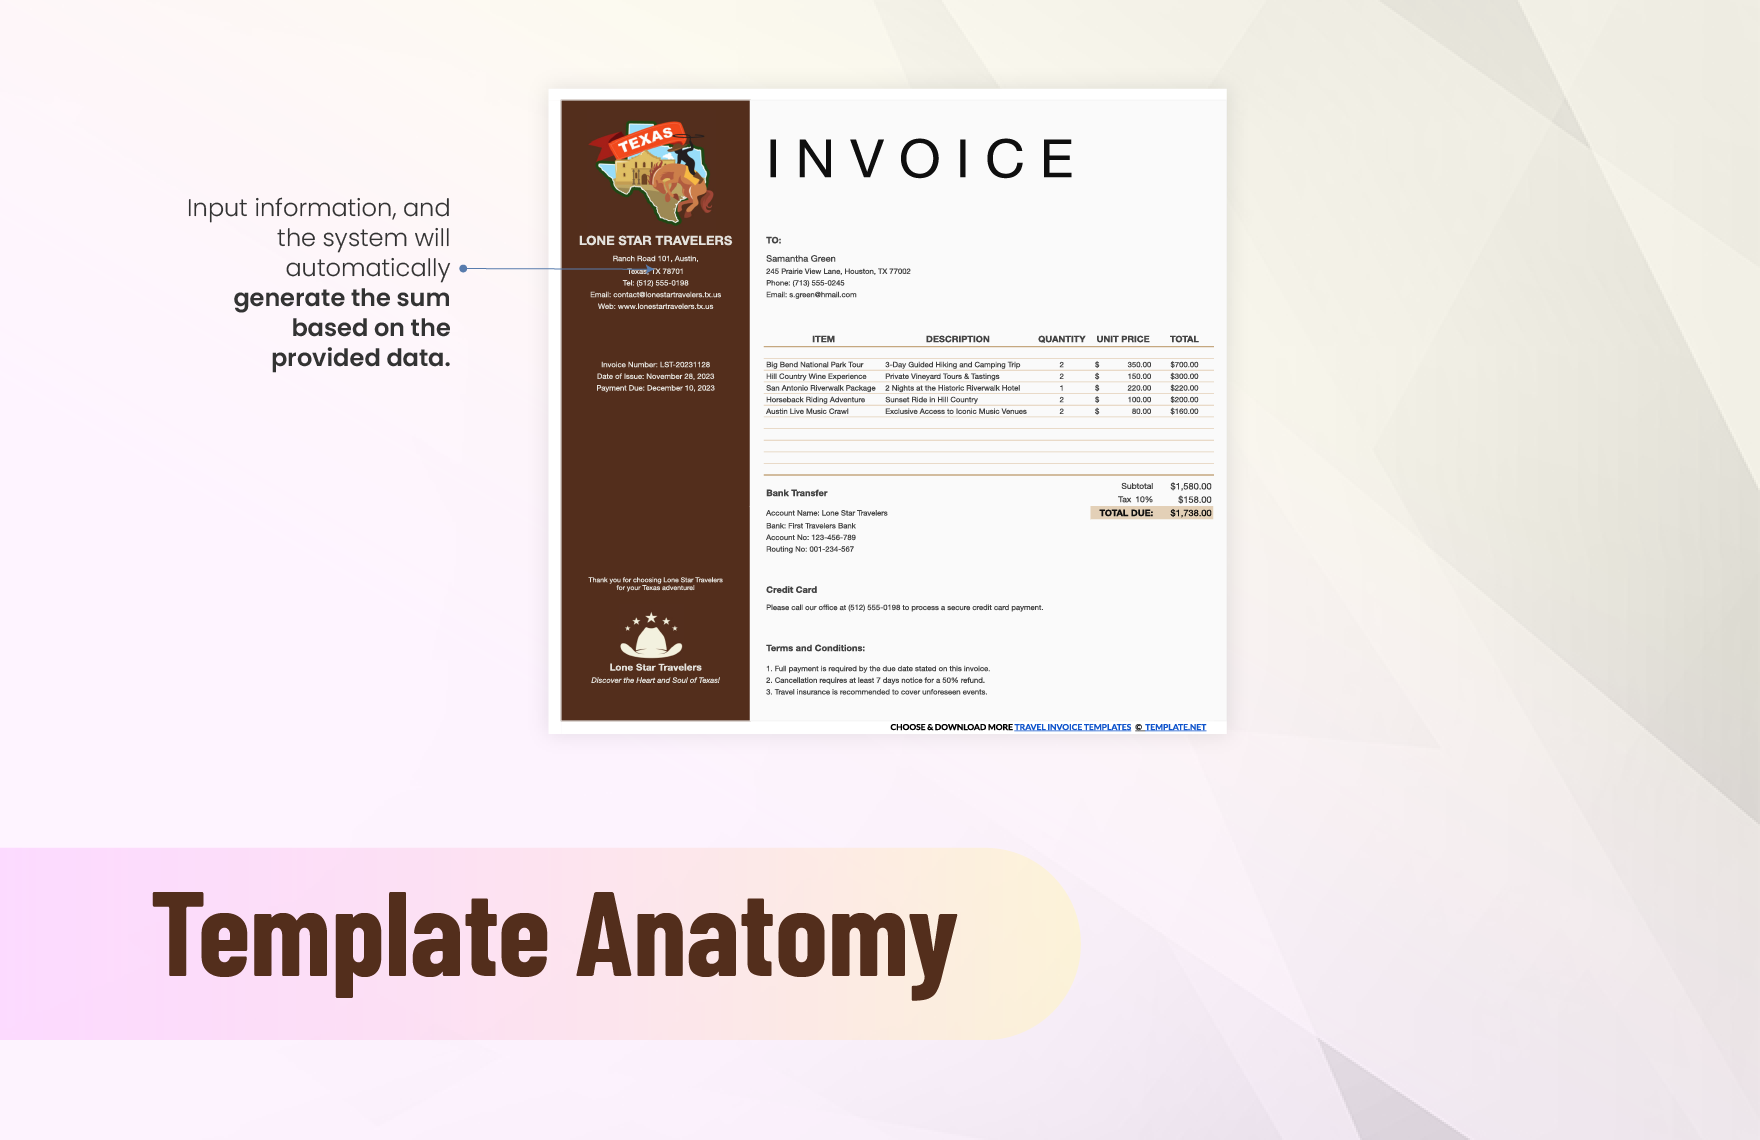 Blank Travel Invoice Template